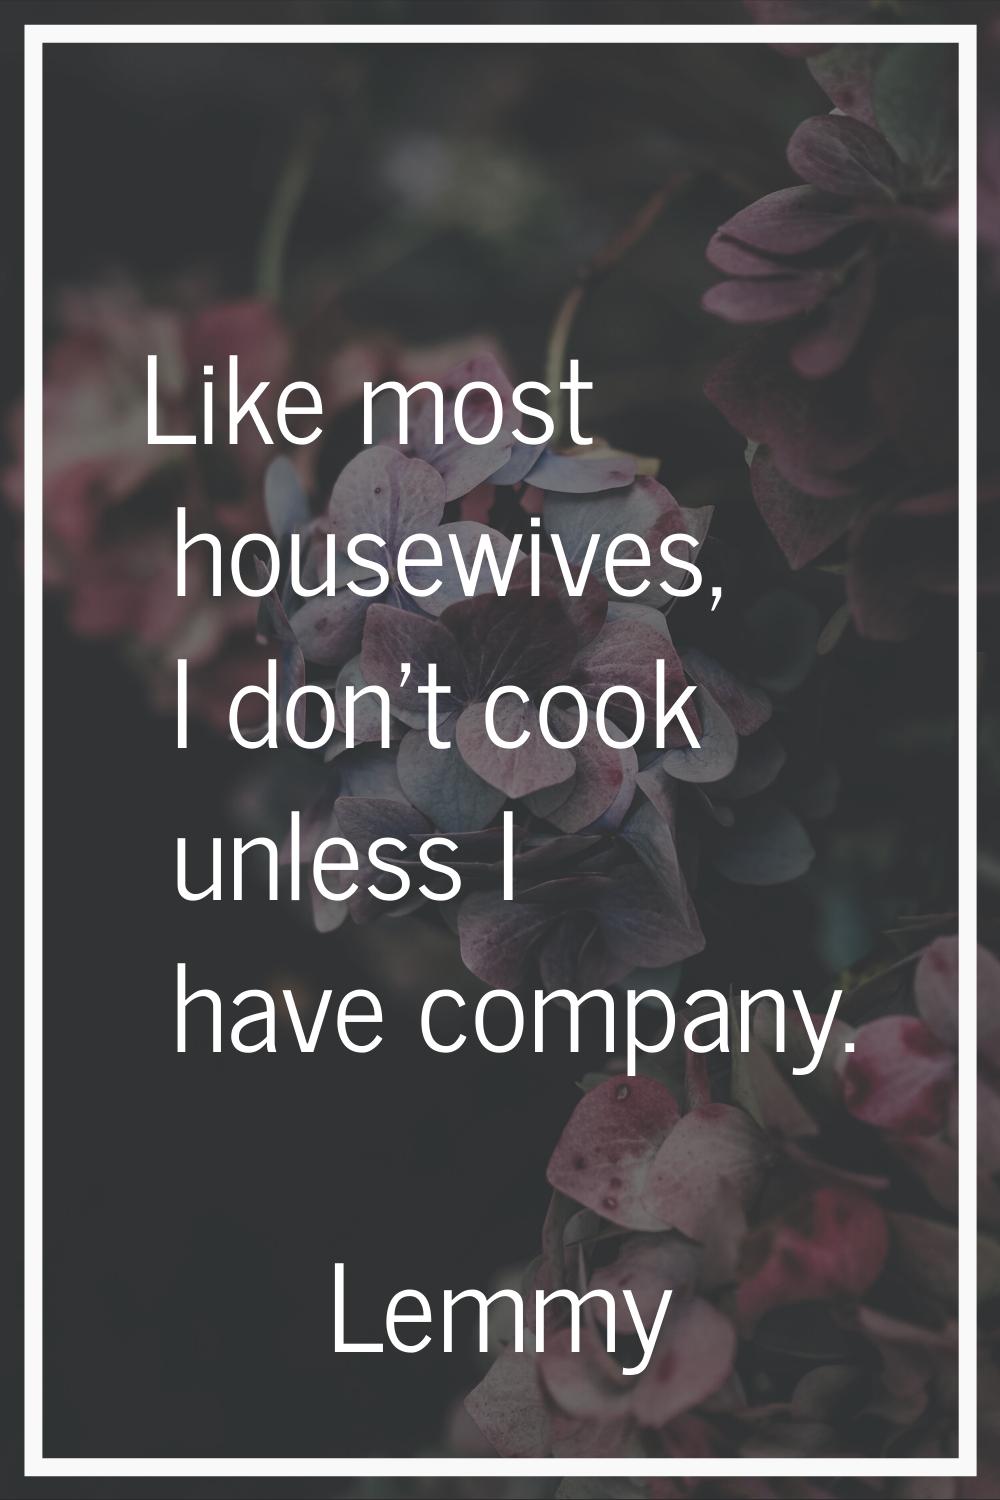 Like most housewives, I don't cook unless I have company.